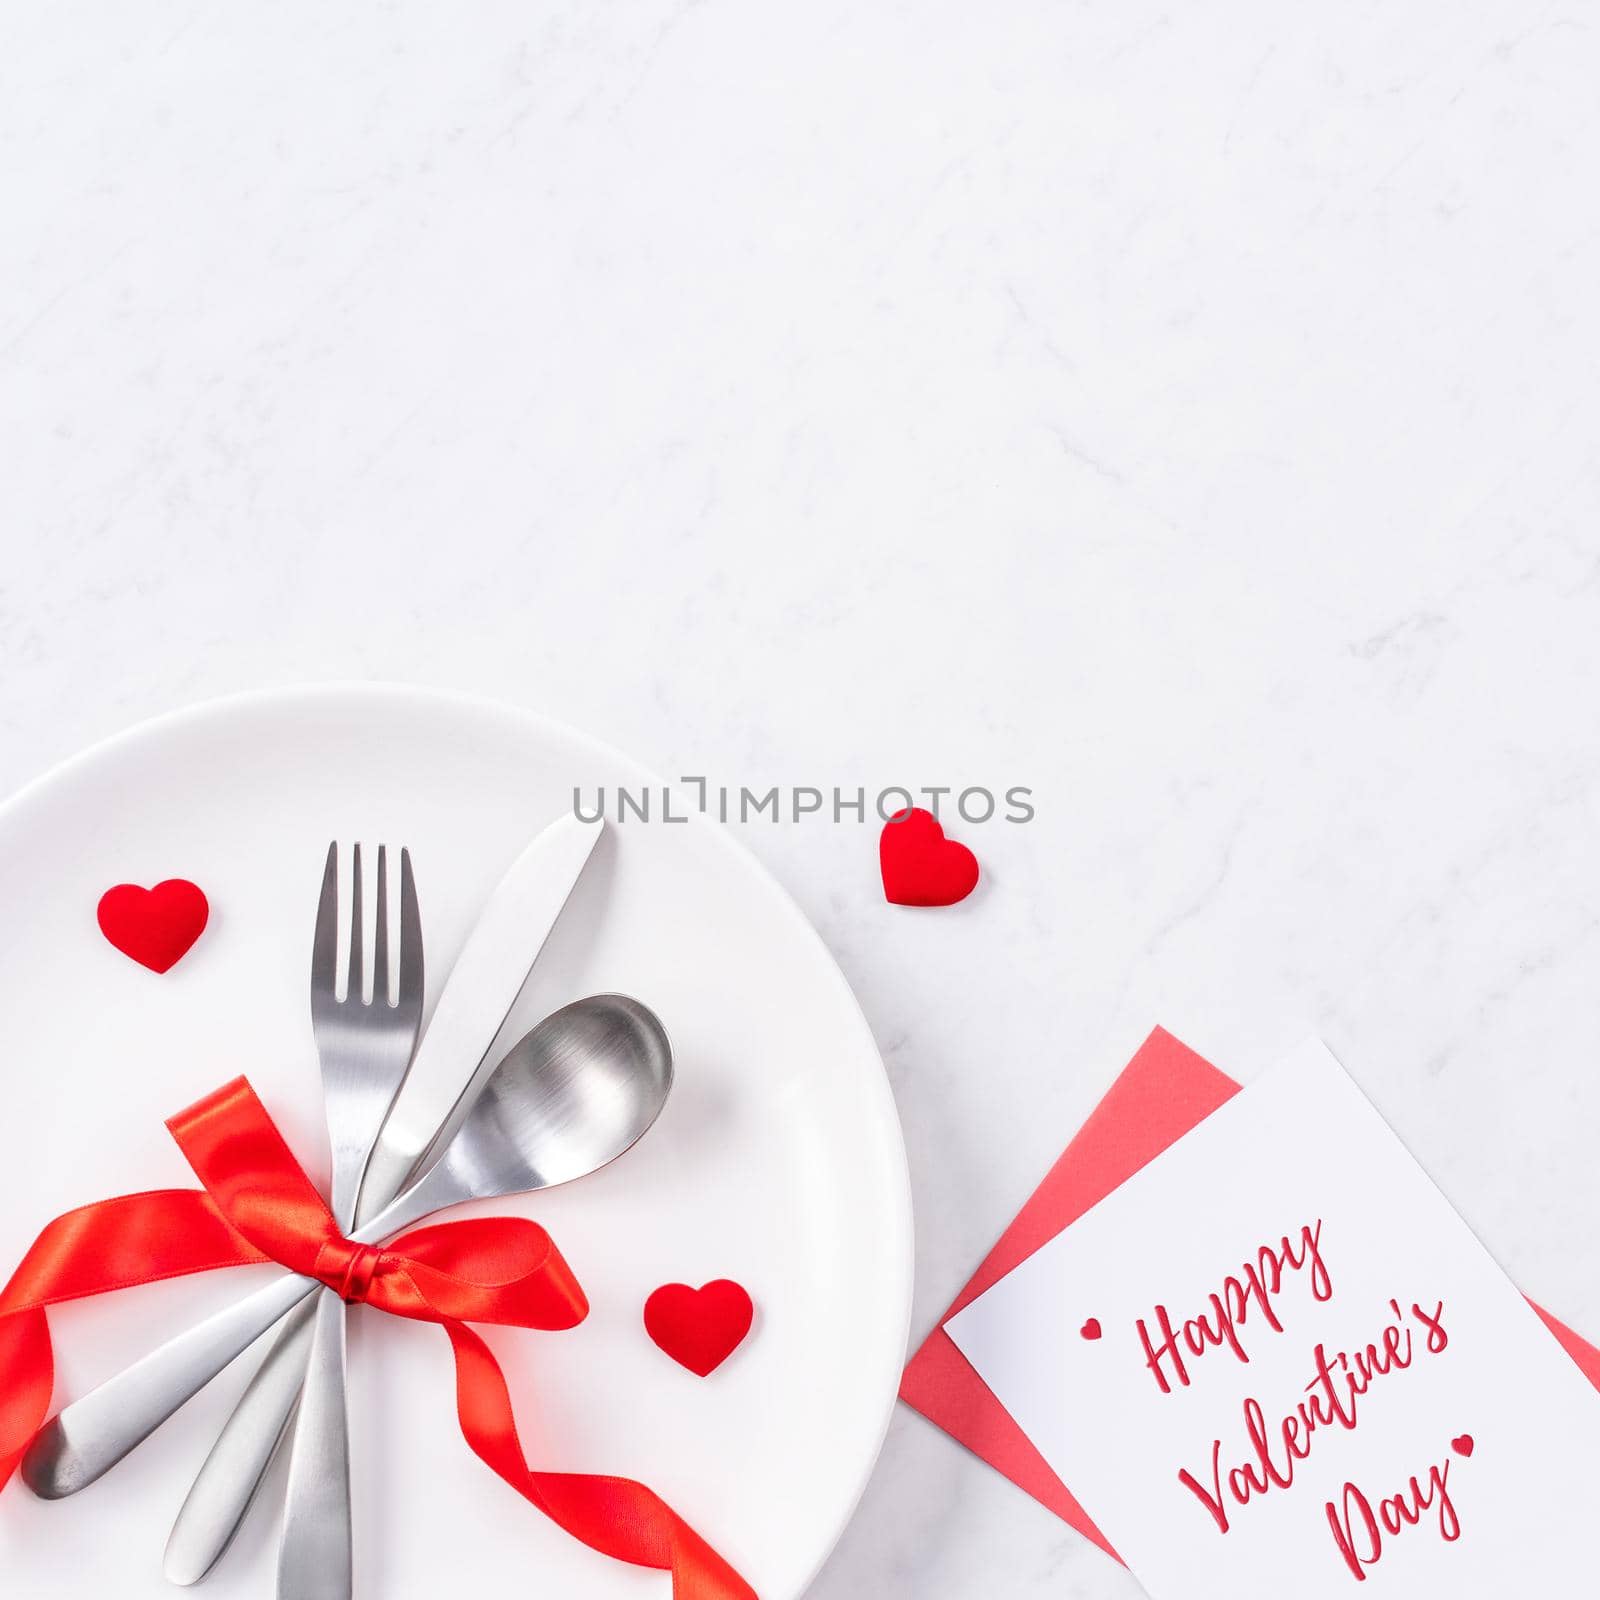 Valentine's Day holiday dating meal, banquet greeting card design concept - White plate and red ribbon on marble background, top view, flat lay. by ROMIXIMAGE